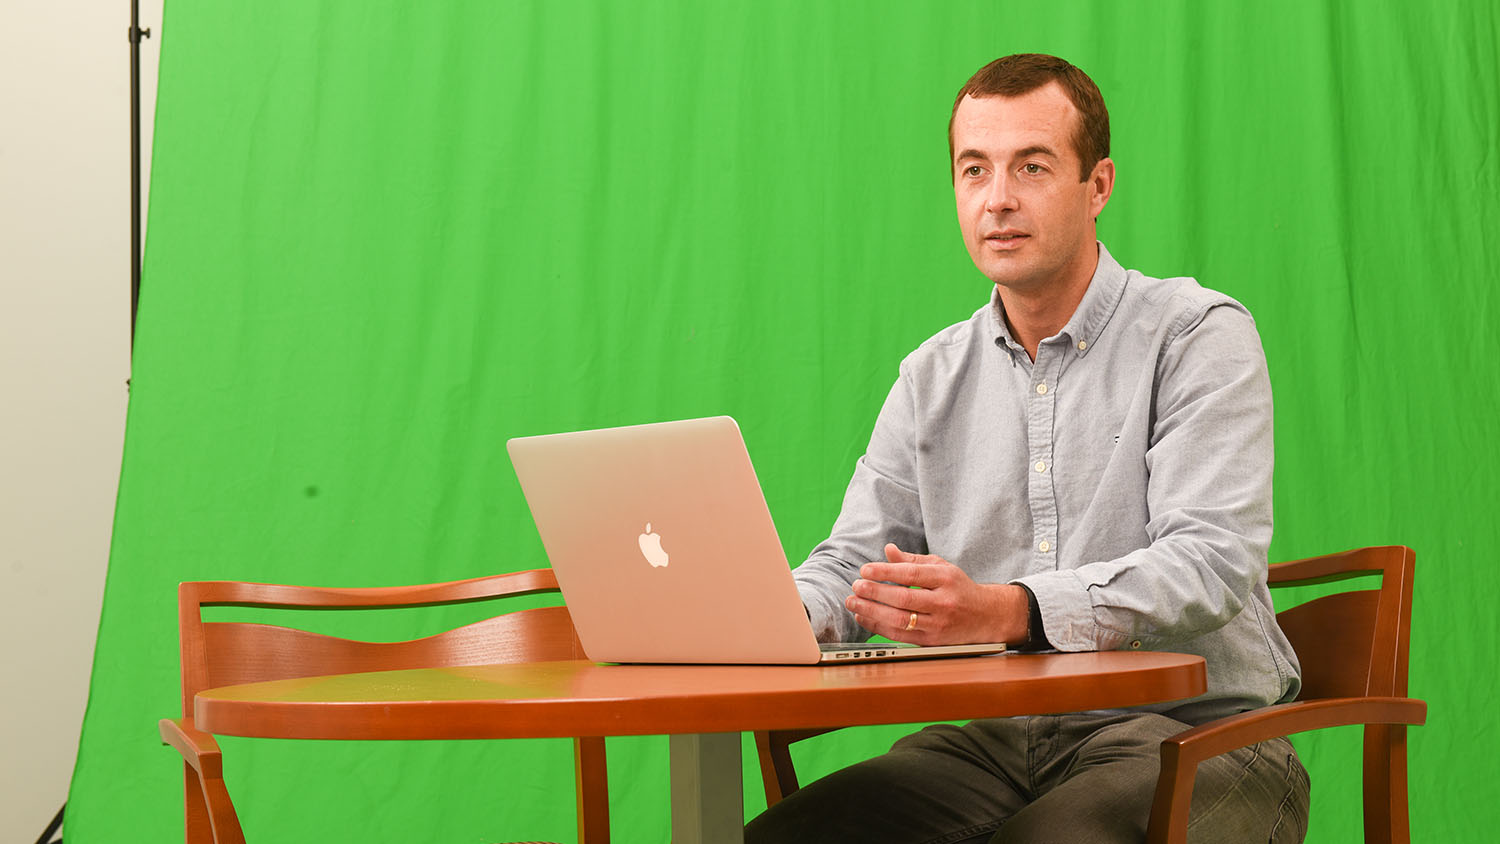 Clint Stevenson sitting at a table with a laptop in front of a green screen.